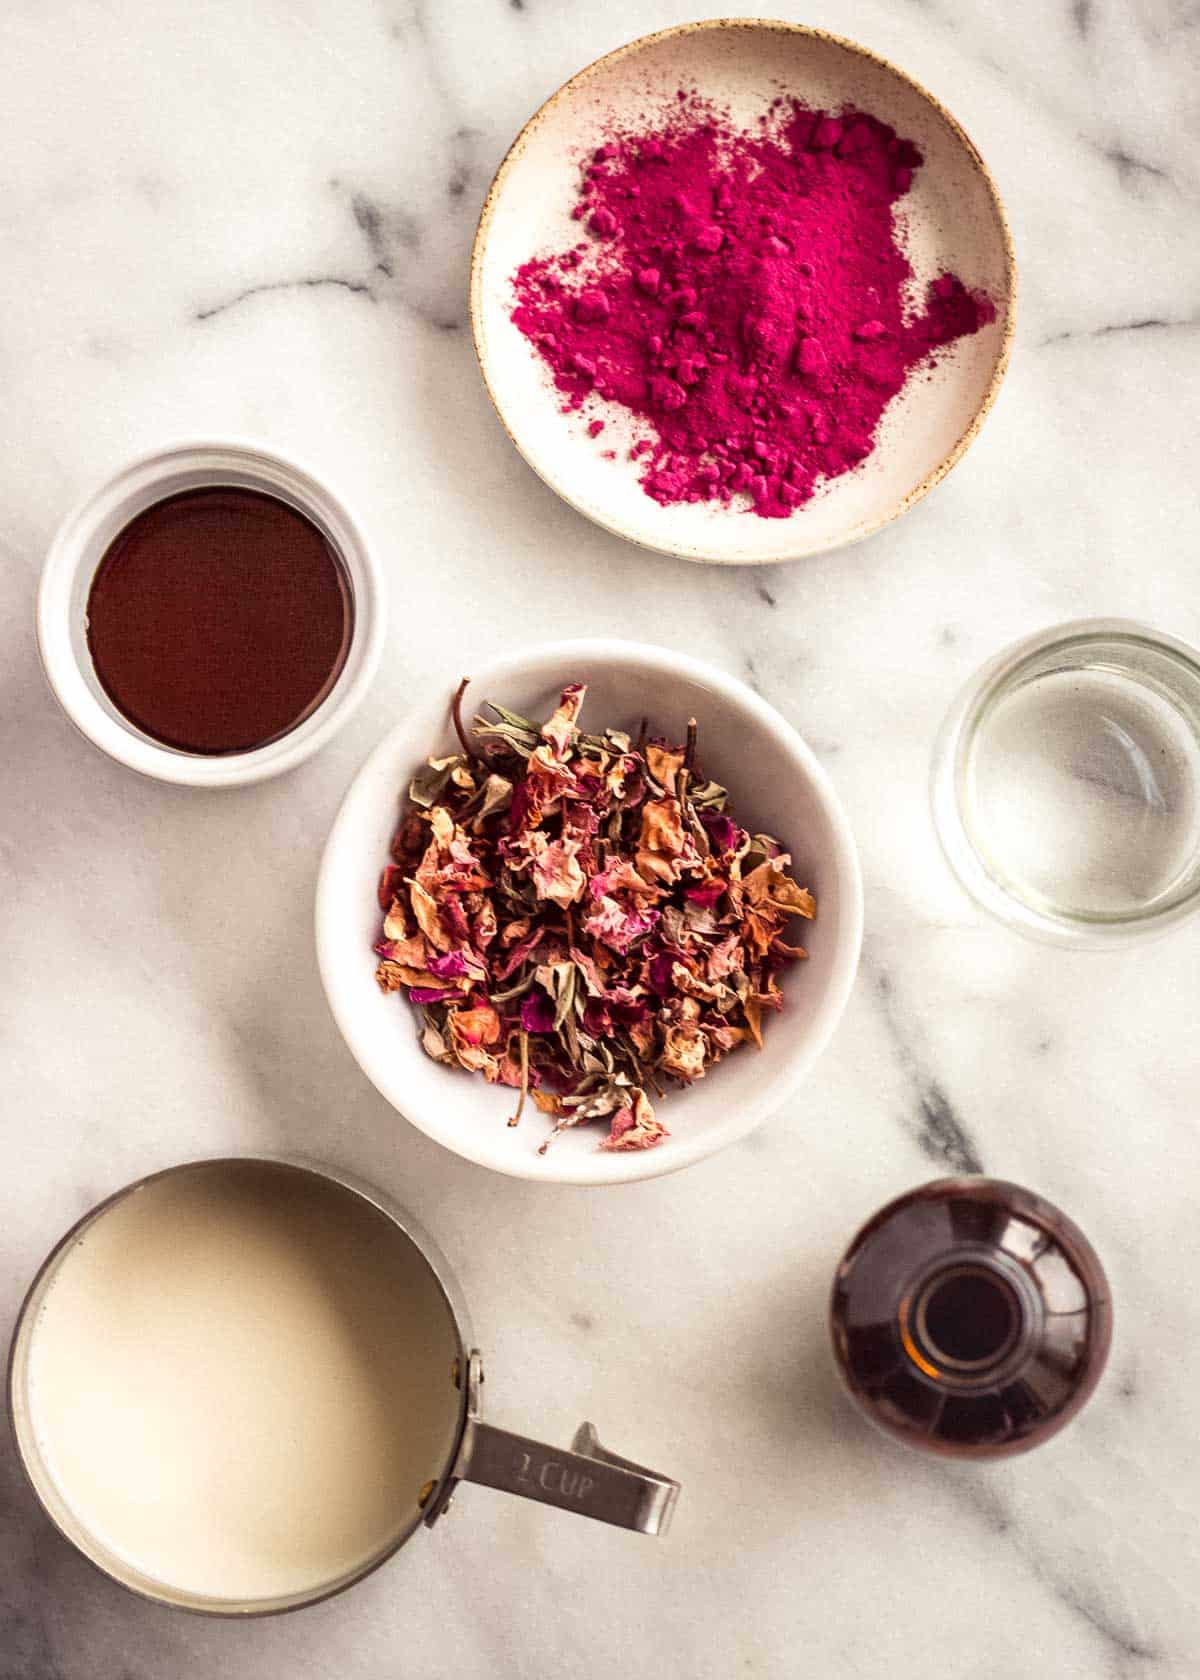 Ingredients to make a rose latte, including beet powder, rose water and milk.